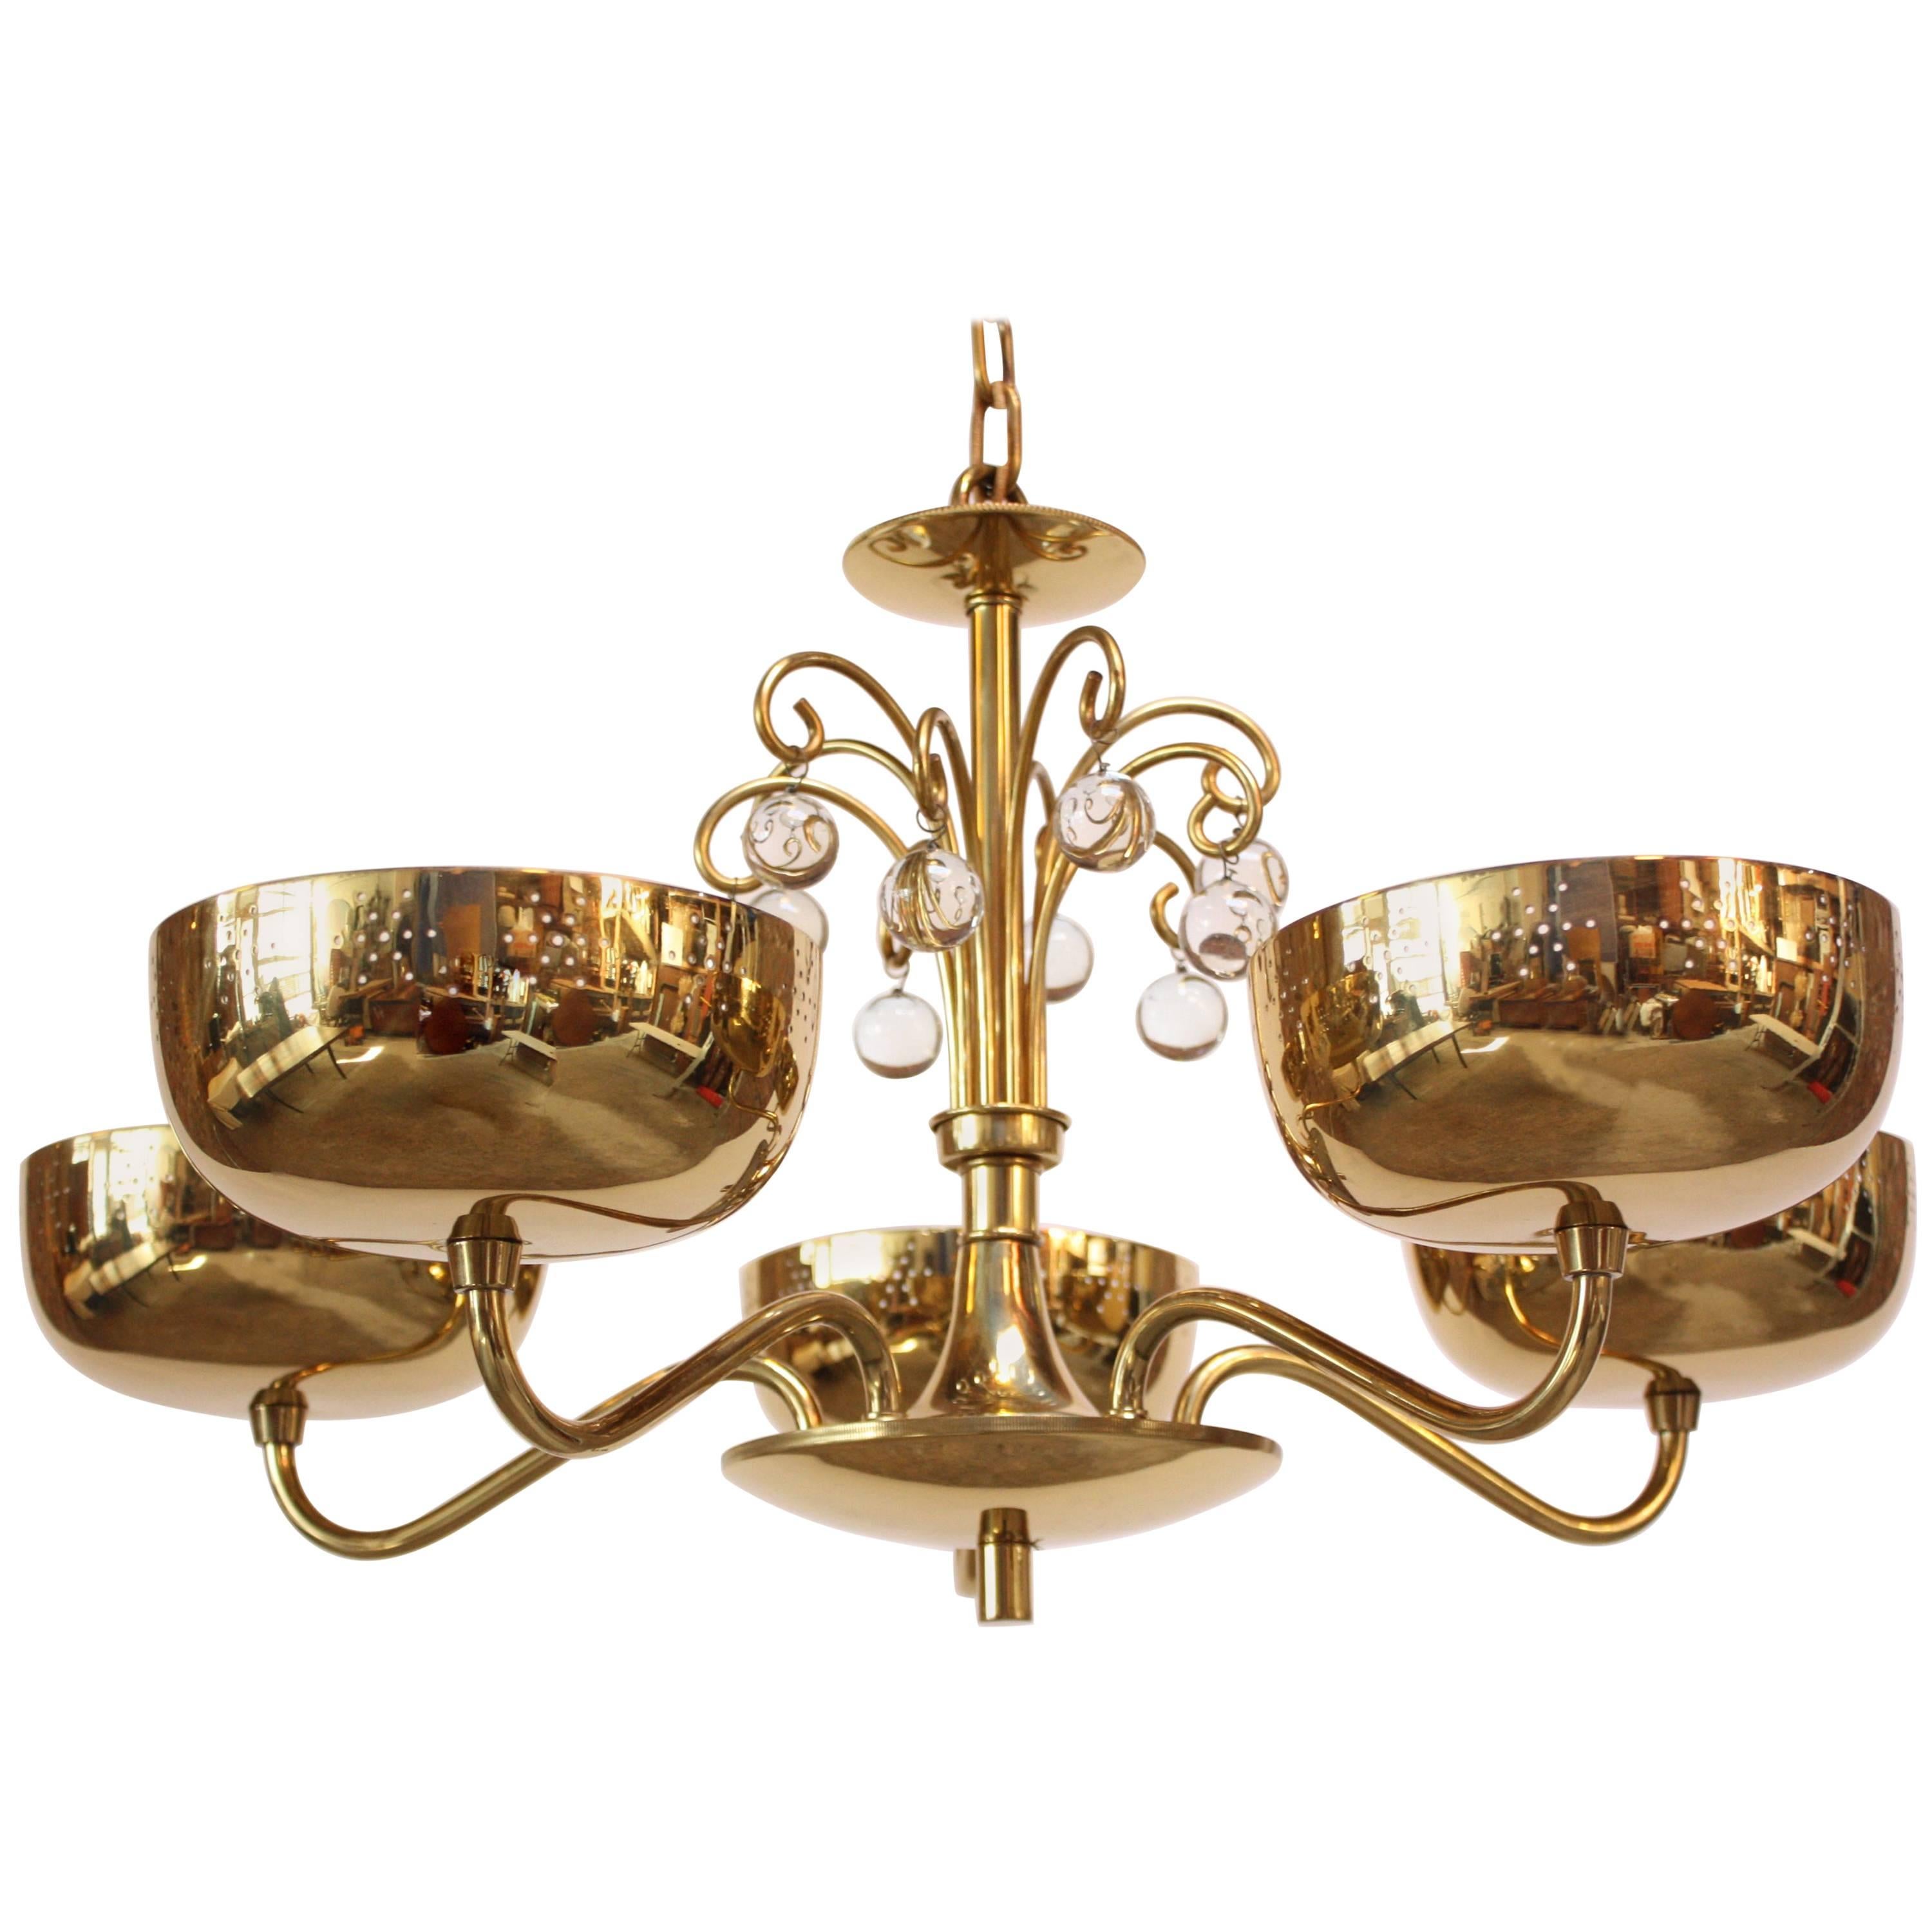 Midcentury Brass Five-Fixture Chandelier with Perforated Shades For Sale